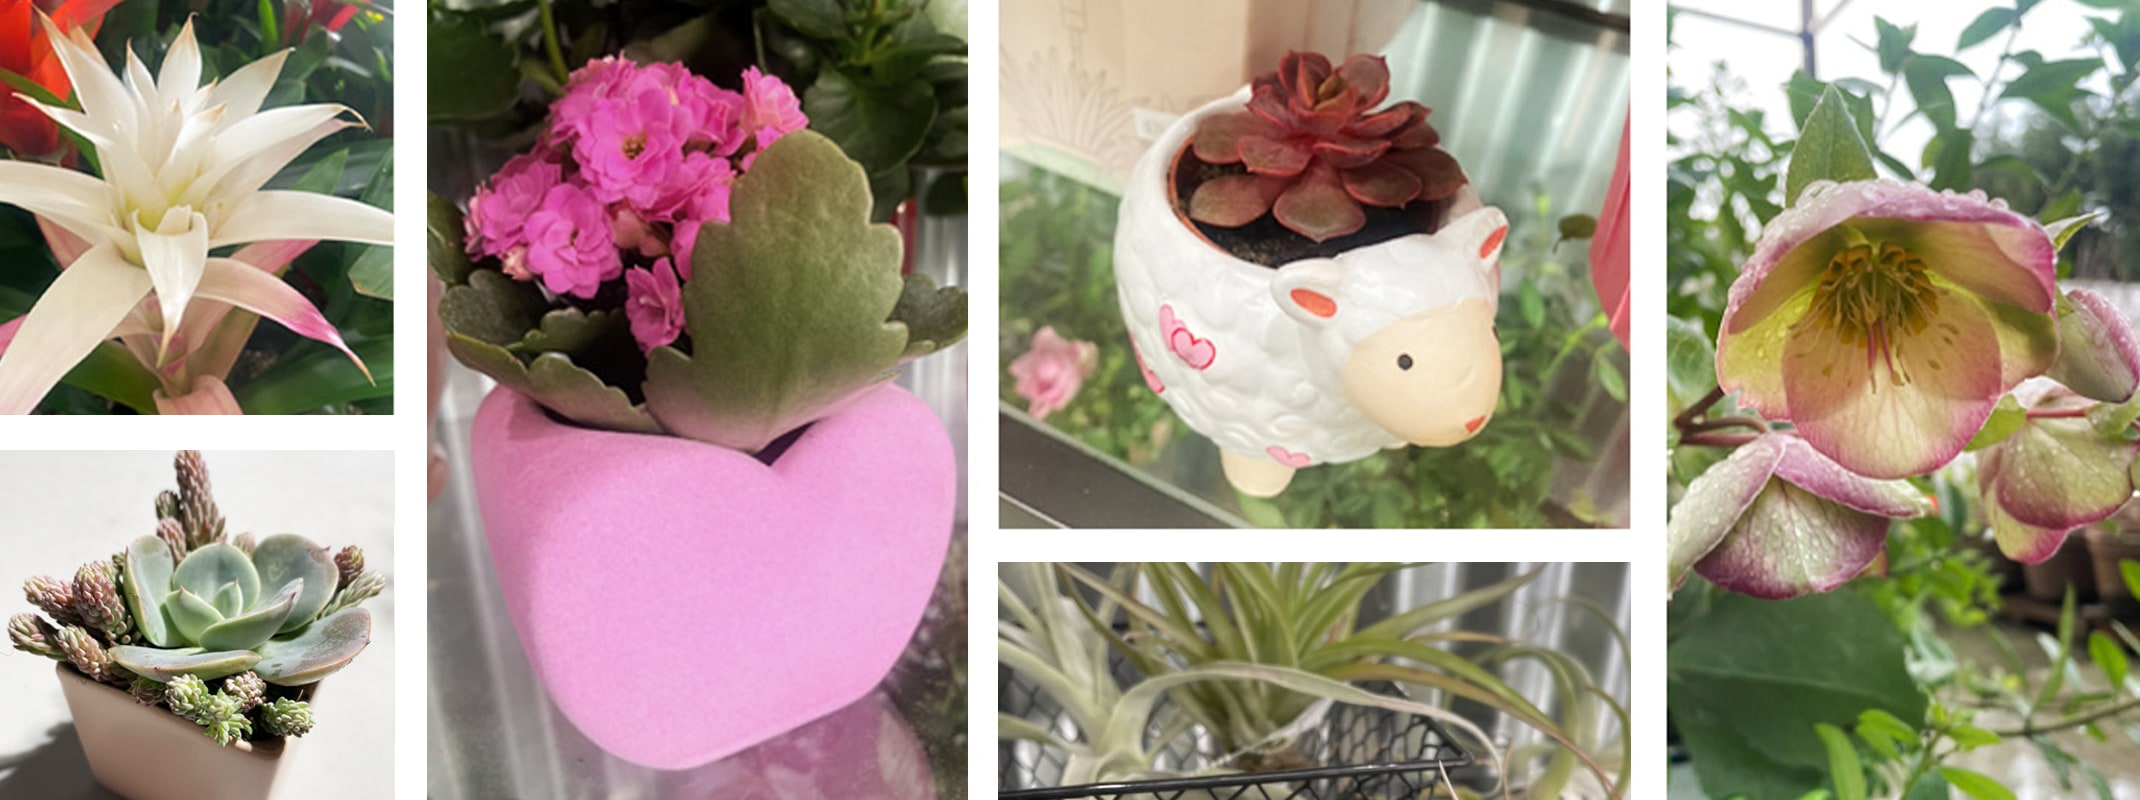 valentine gift ideas bromeliad, succulents in cute containers, hellebores, kalanchoe